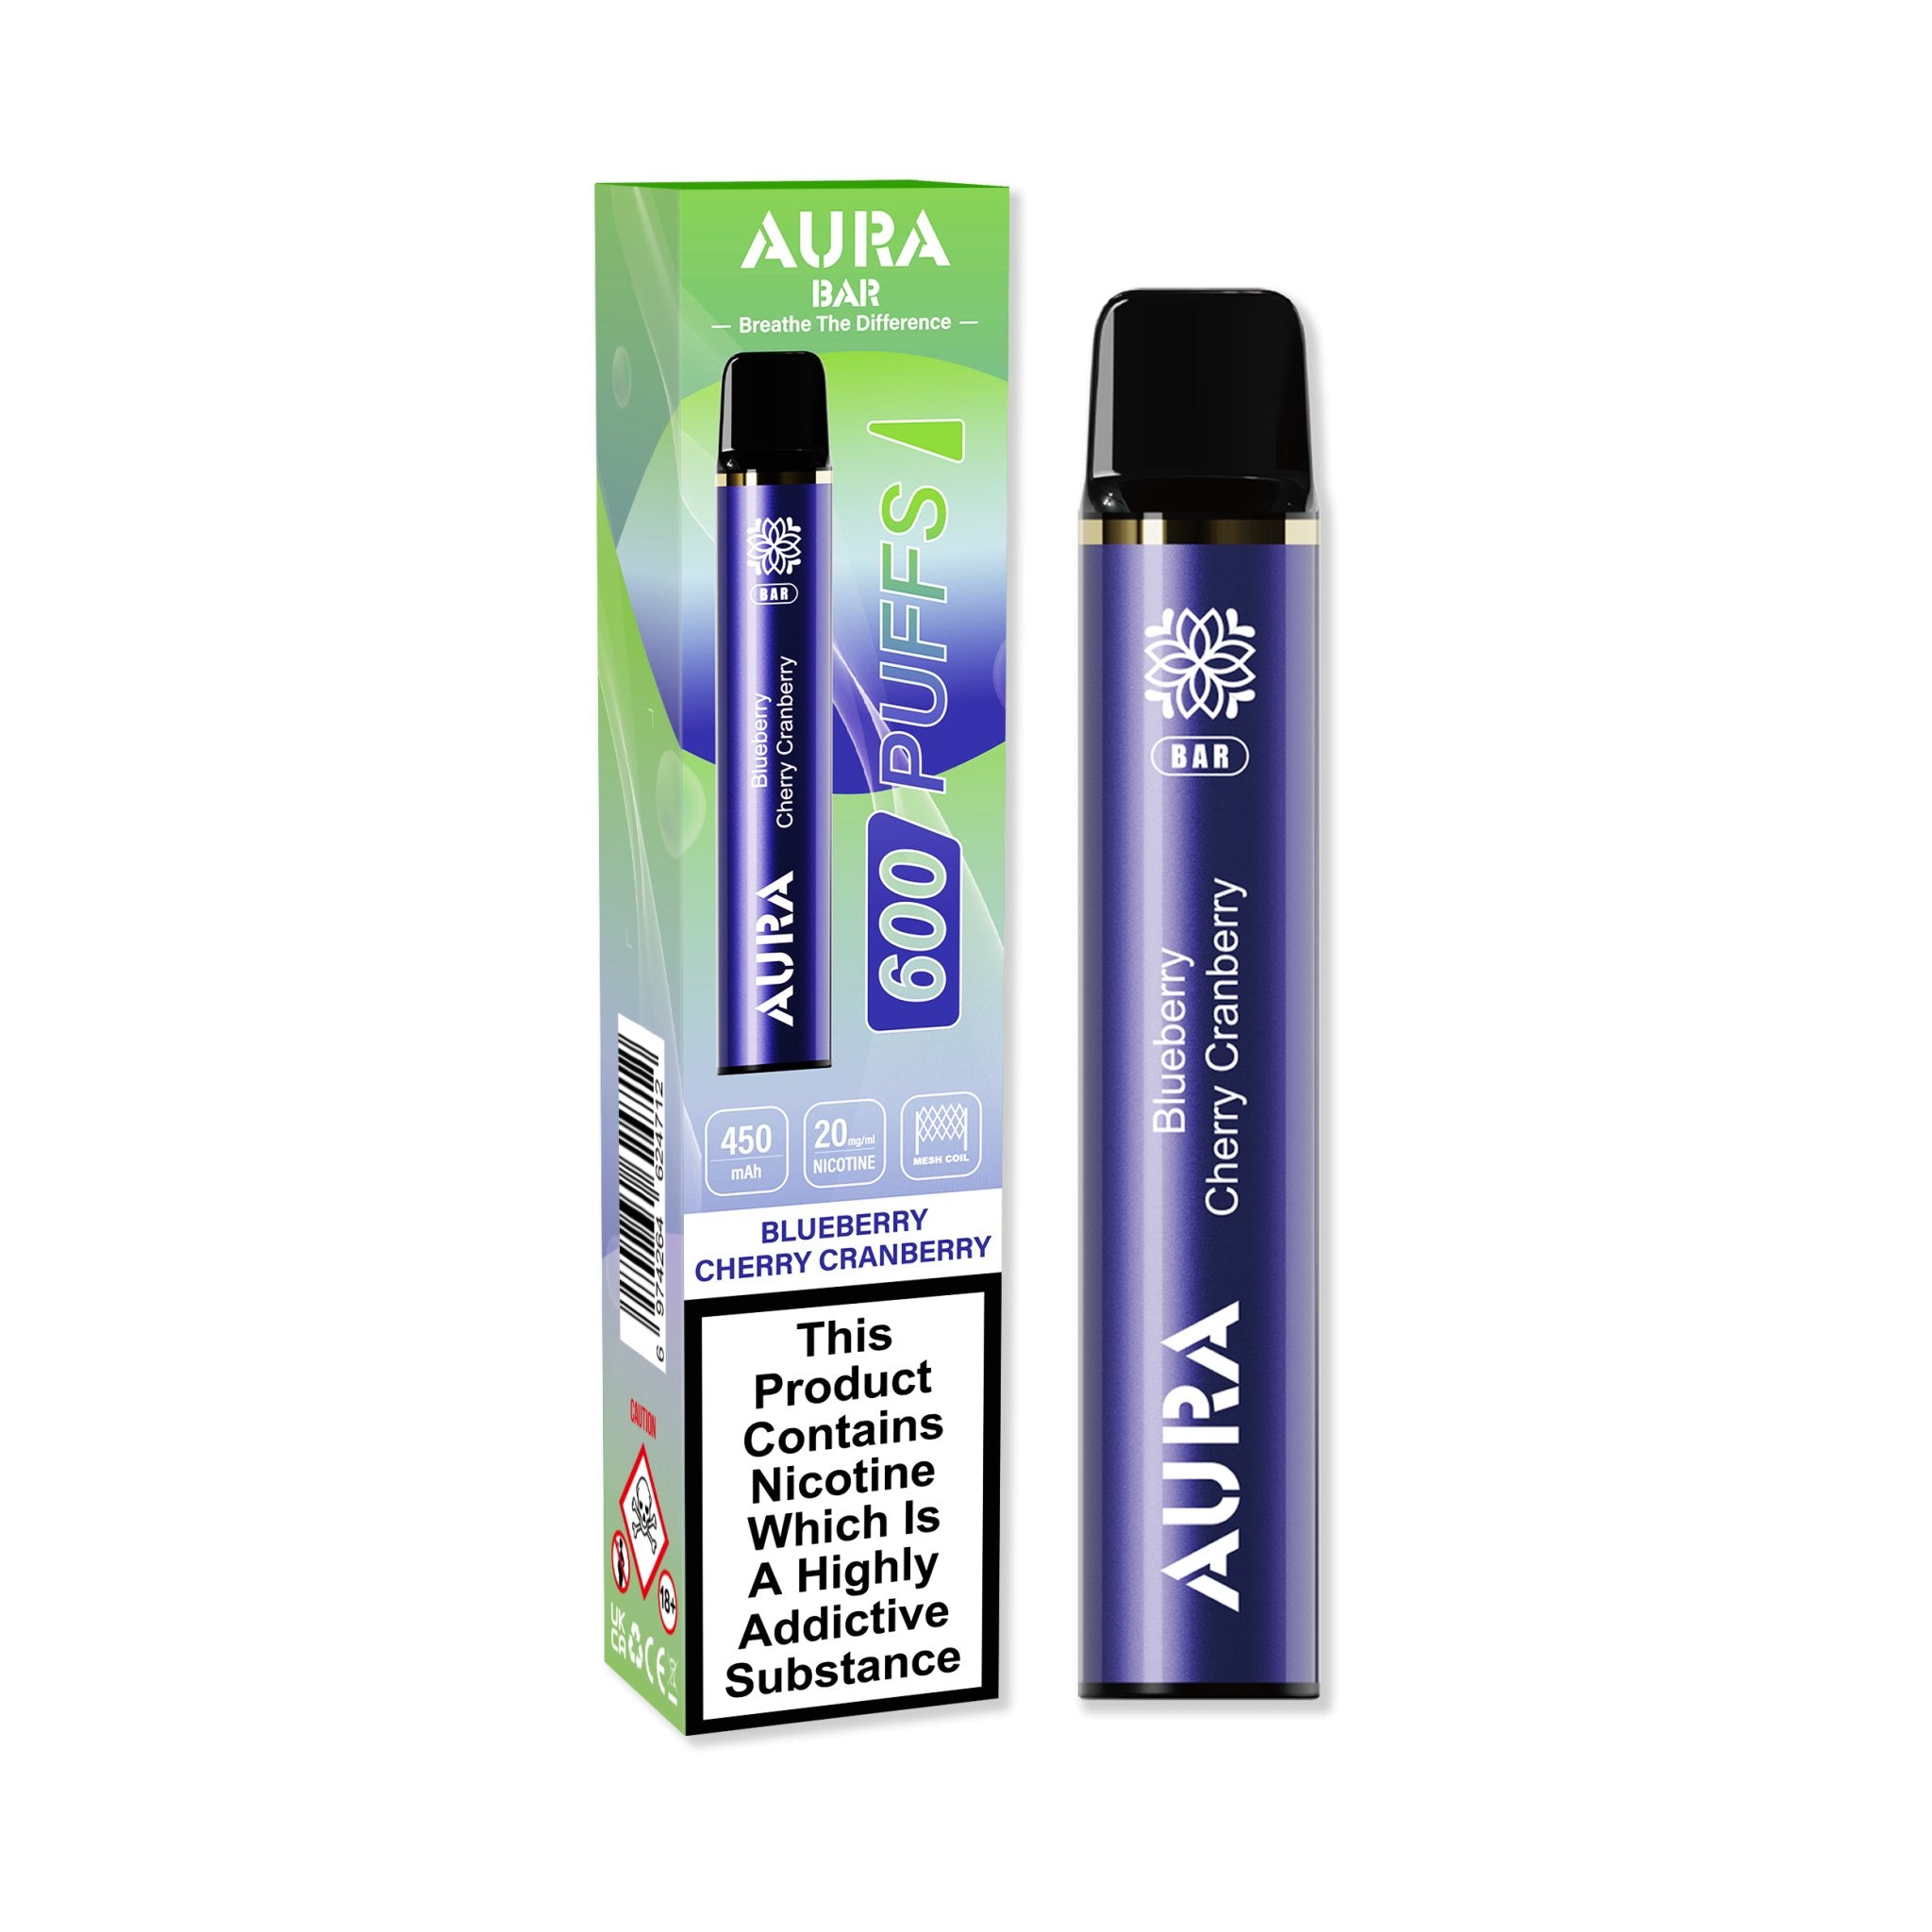 Aura Bar 600 Puffs Disposable Vape By Crystal Prime - Wolfvapes.co.uk-Blueberry Cherry Cranberry